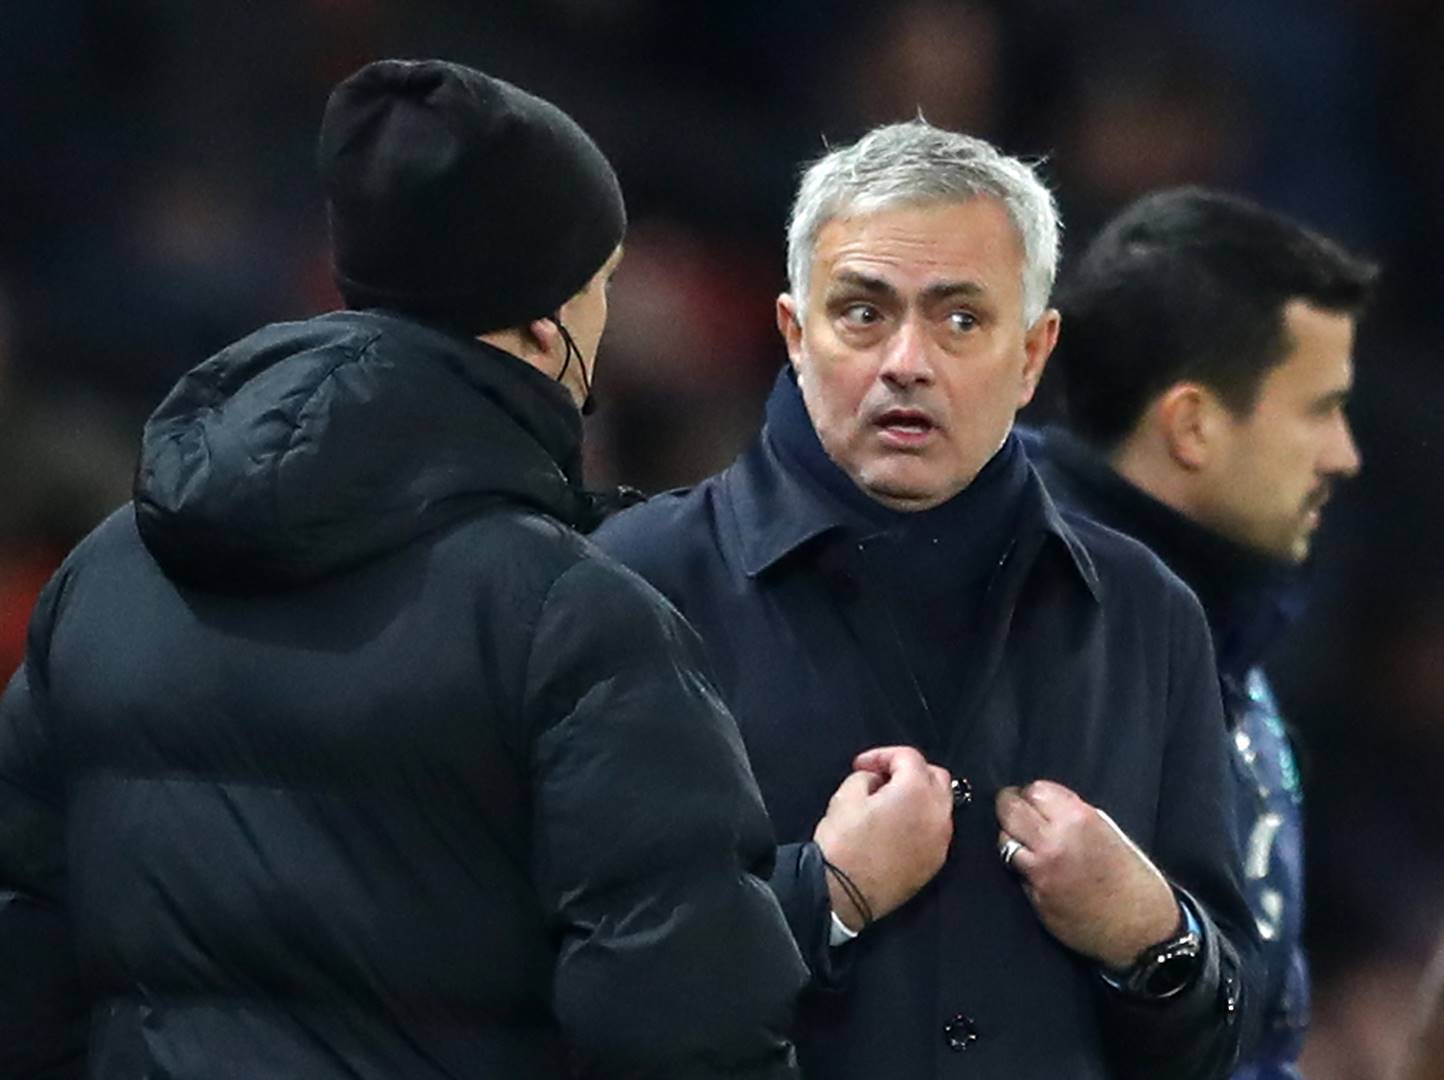 Jose Mourinho, Manager of Tottenham Hotspur complains to the fourth official during the Premier League match against Manchester United on December 4 2019. Picture: Michael Steele/Getty Images